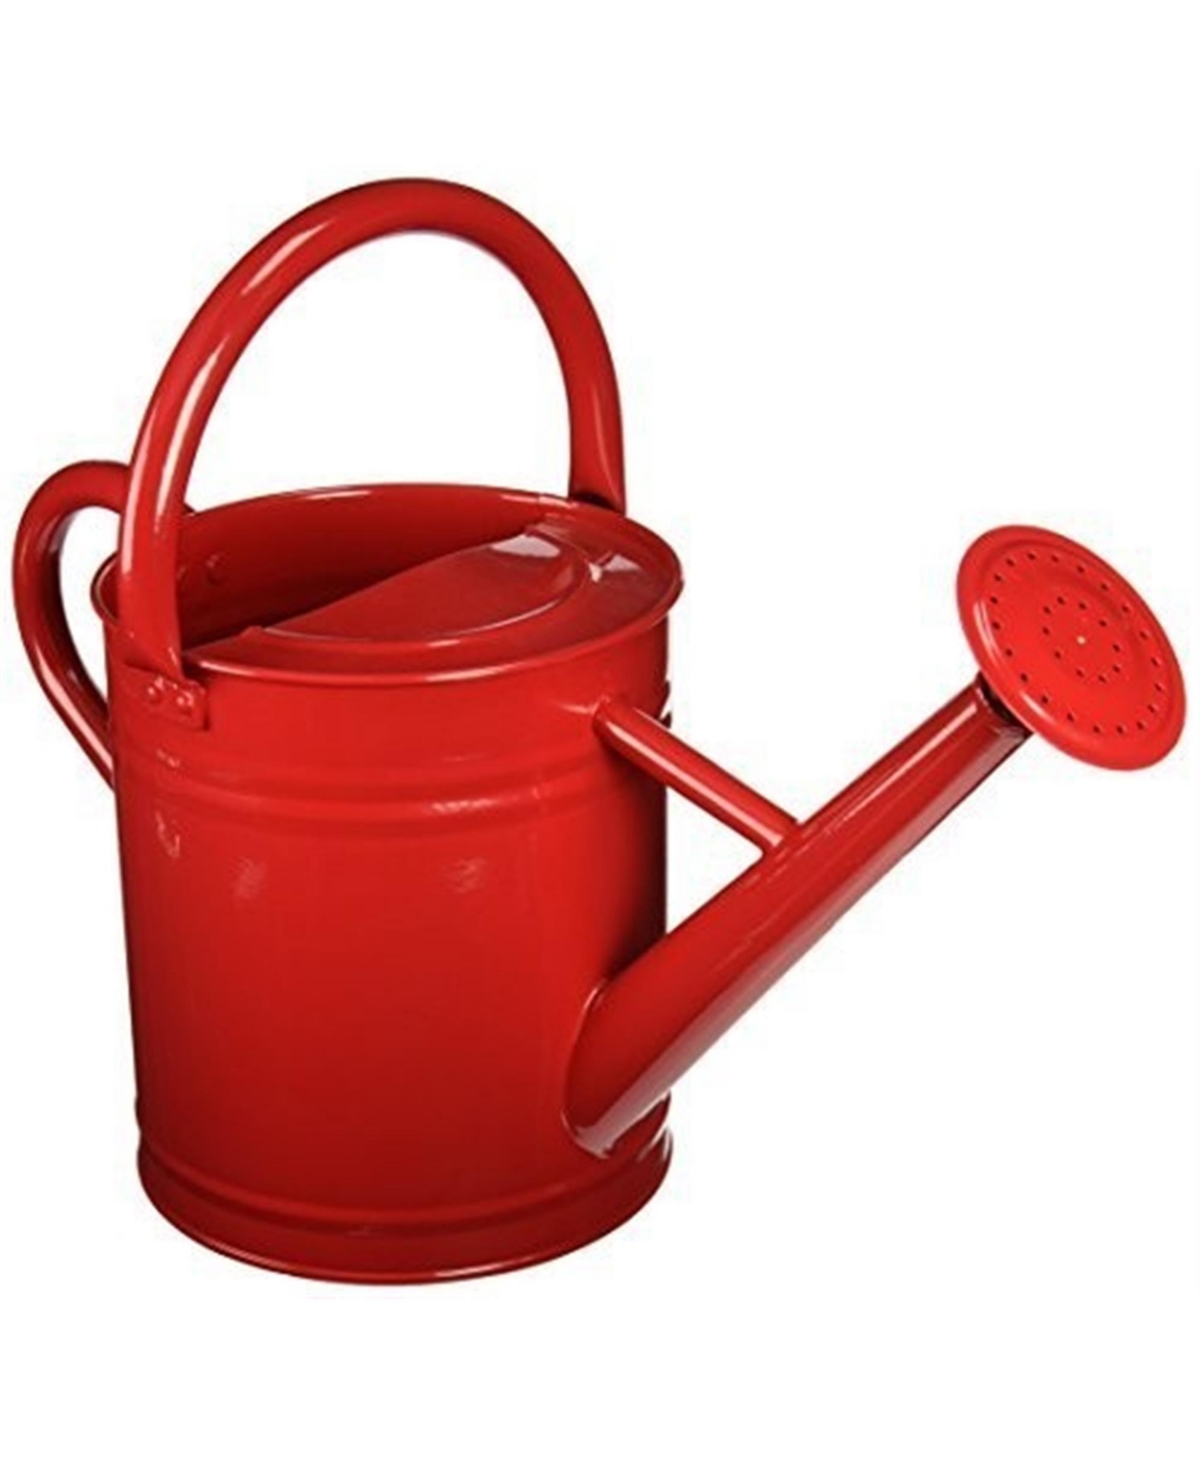 Gardener Select Metal Watering Can, Red, 0.92 Gallons - Red